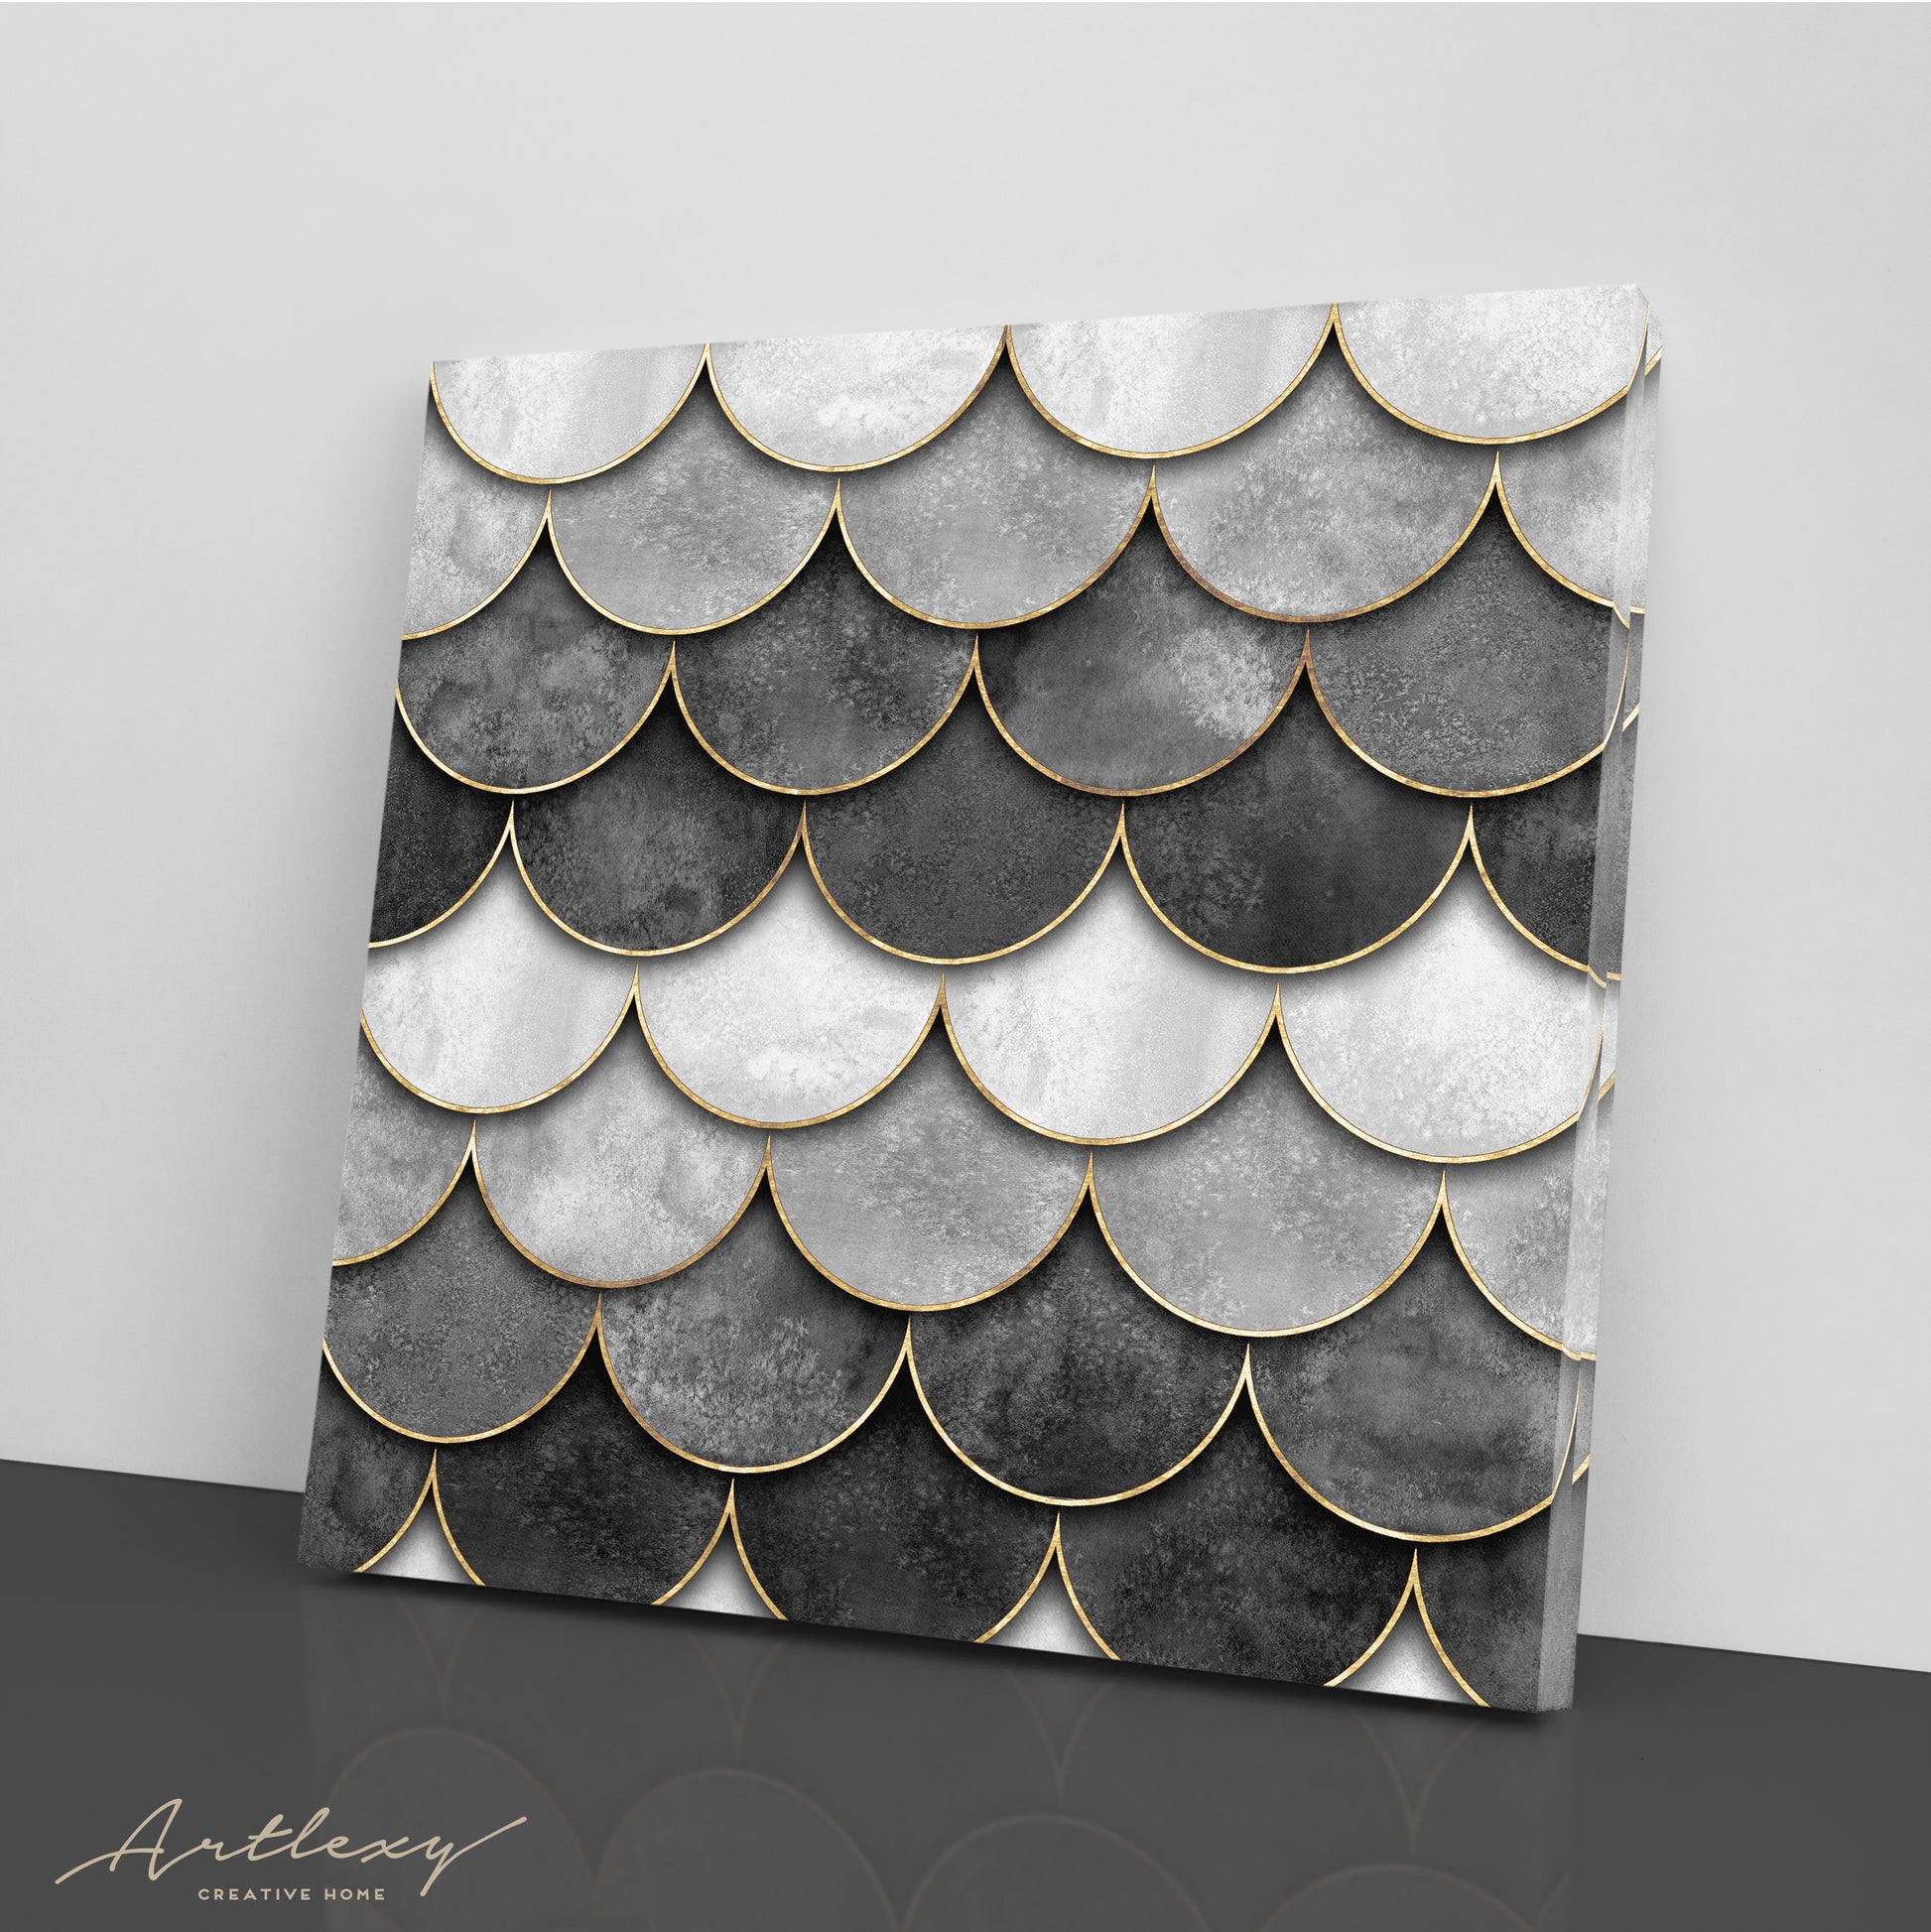 Abstract Geometric Waves Canvas Print ArtLexy 1 Panel 12"x12" inches 